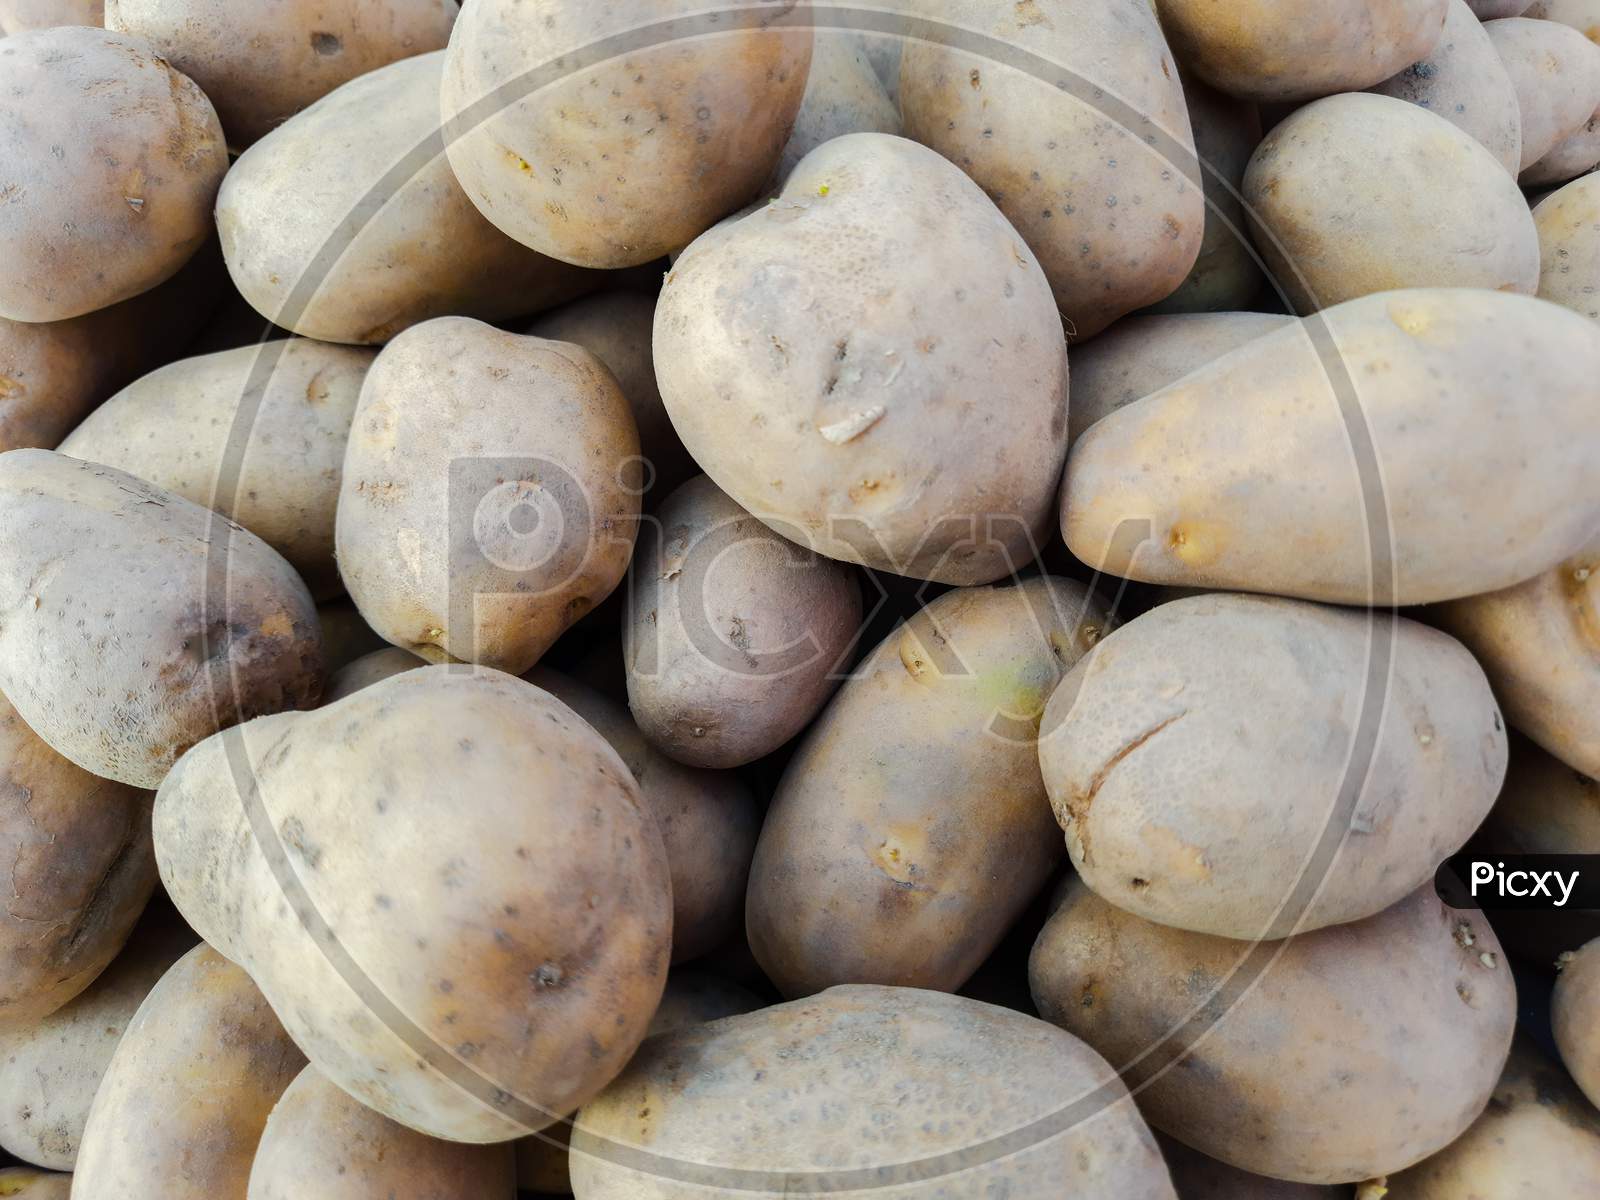 Potatoes In Market For Sale With Mixed Quality Bad And Good